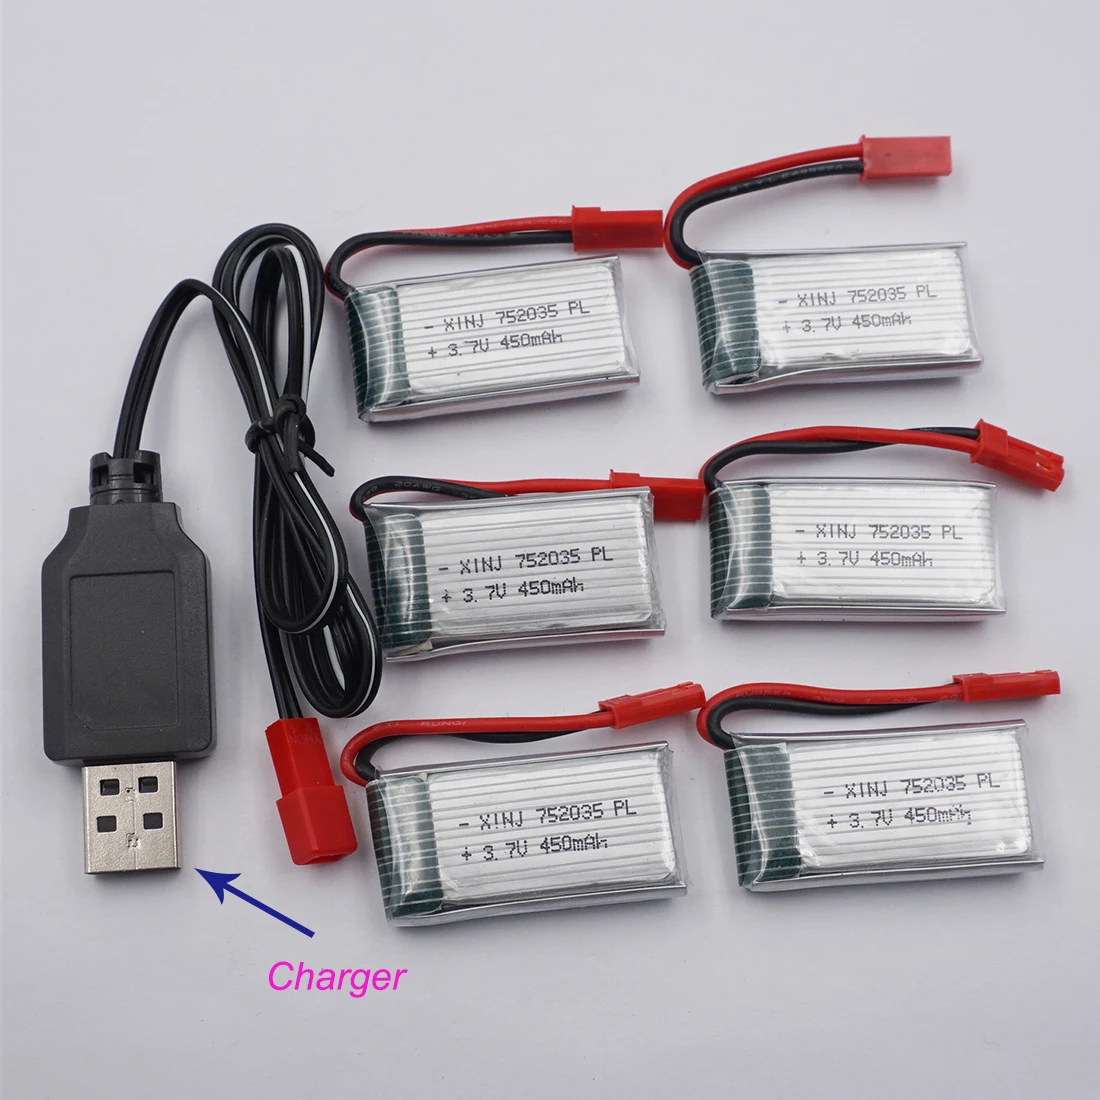 

XINJ Charger +6pcs 3.7V 450mAh 25C Rechargeable Polymer Li Lipo Battery 752035 JST For X4H107 MJXF47 DFDF180 RC Quadcopter Drone